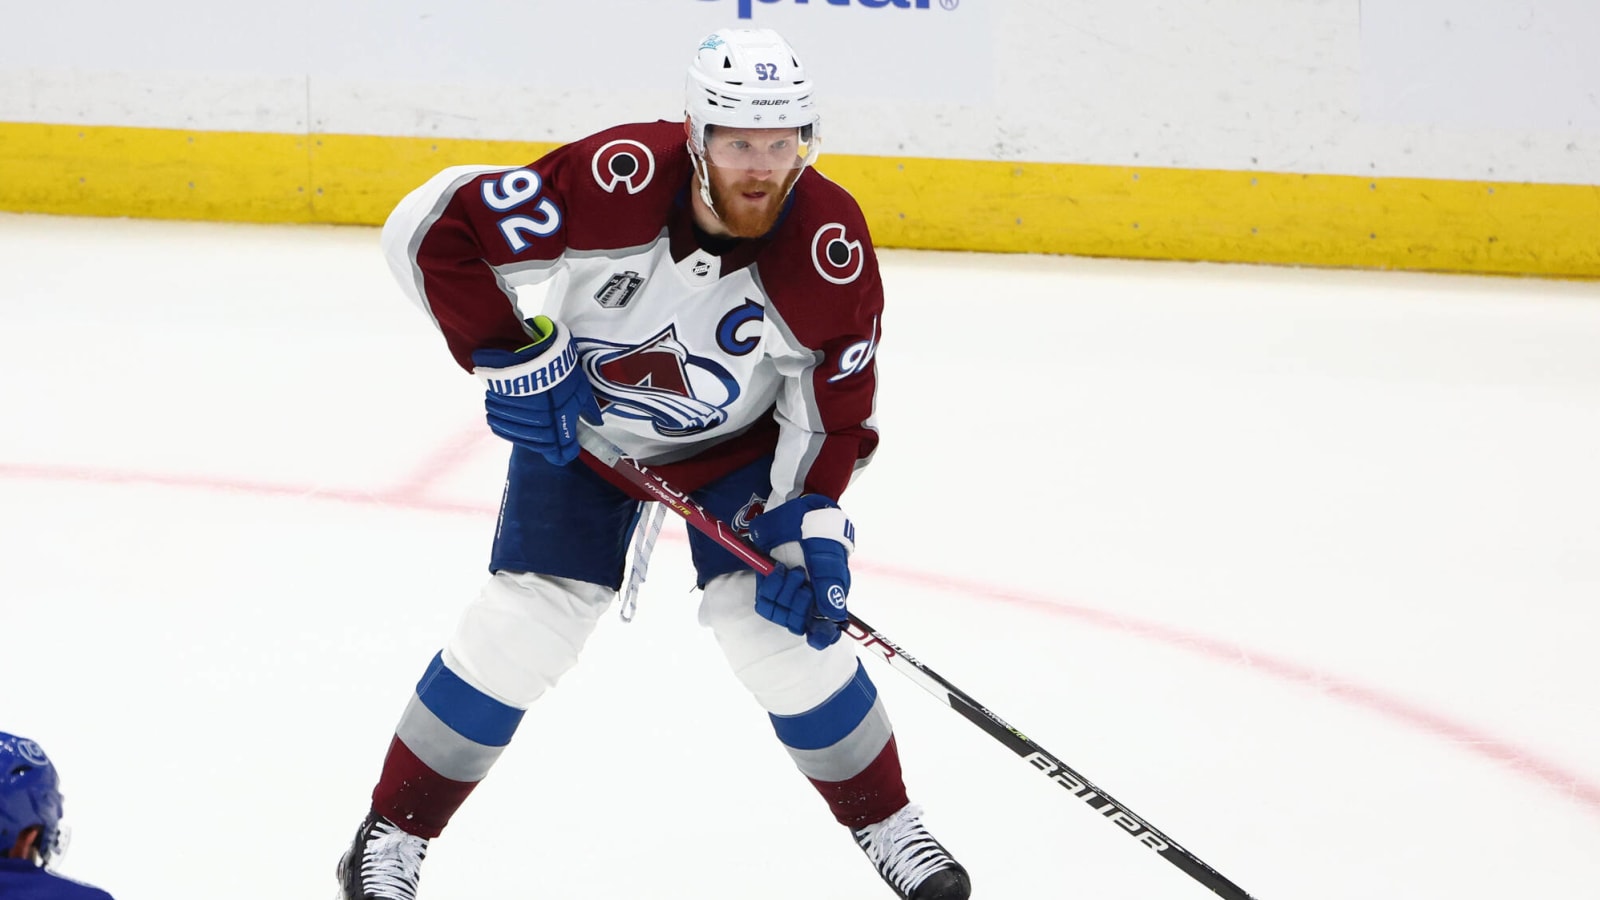 Where Landeskog Is At One Year Removed From His Surgery